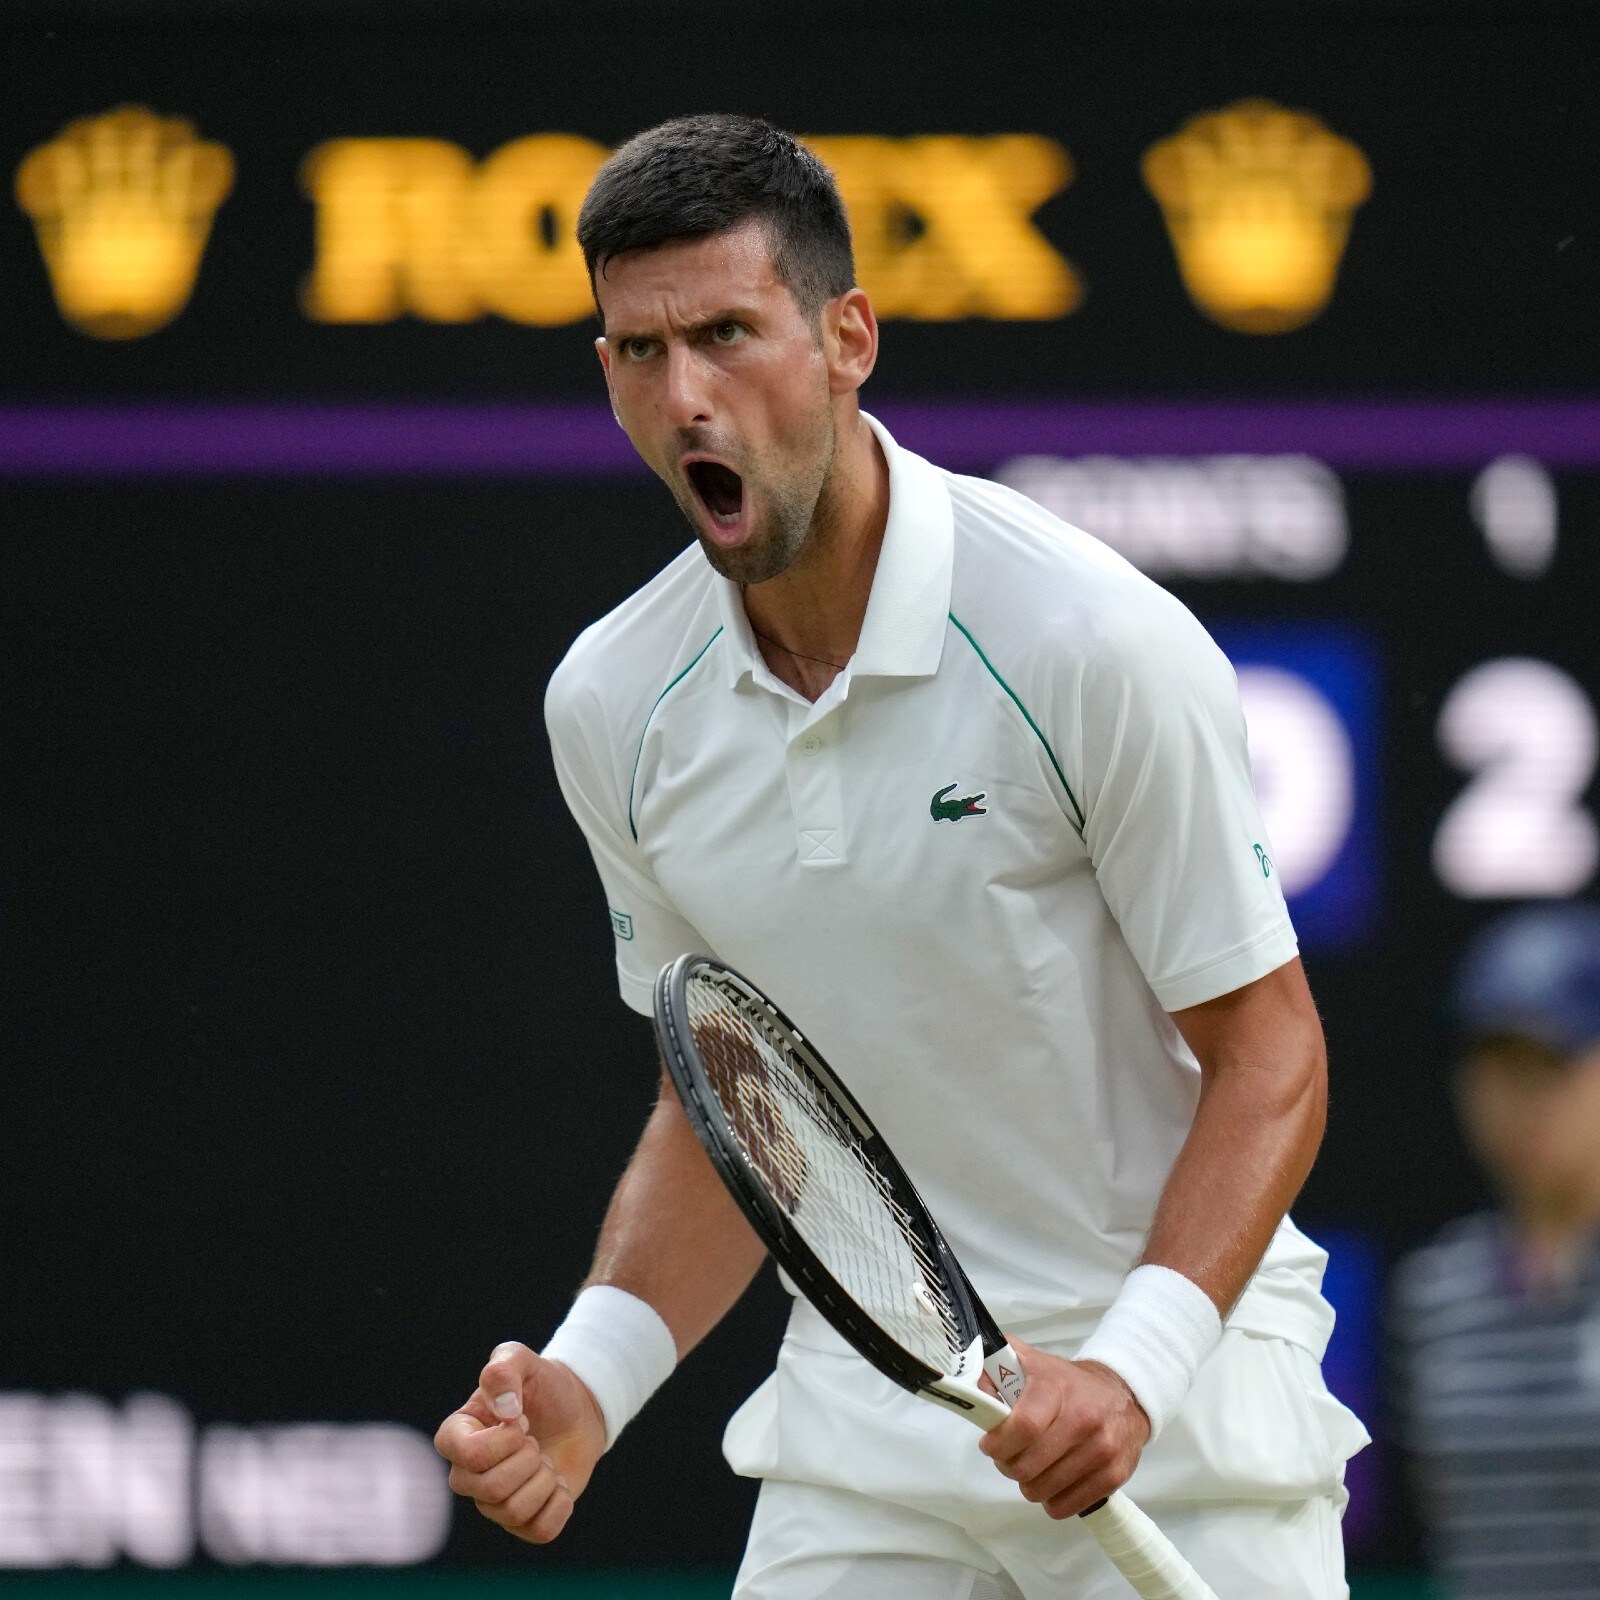 Wimbledon 2022, Day 7 Round-up Novak Djokovic Through to Quarters; David Goffin Prevails in Longest Match of the Year